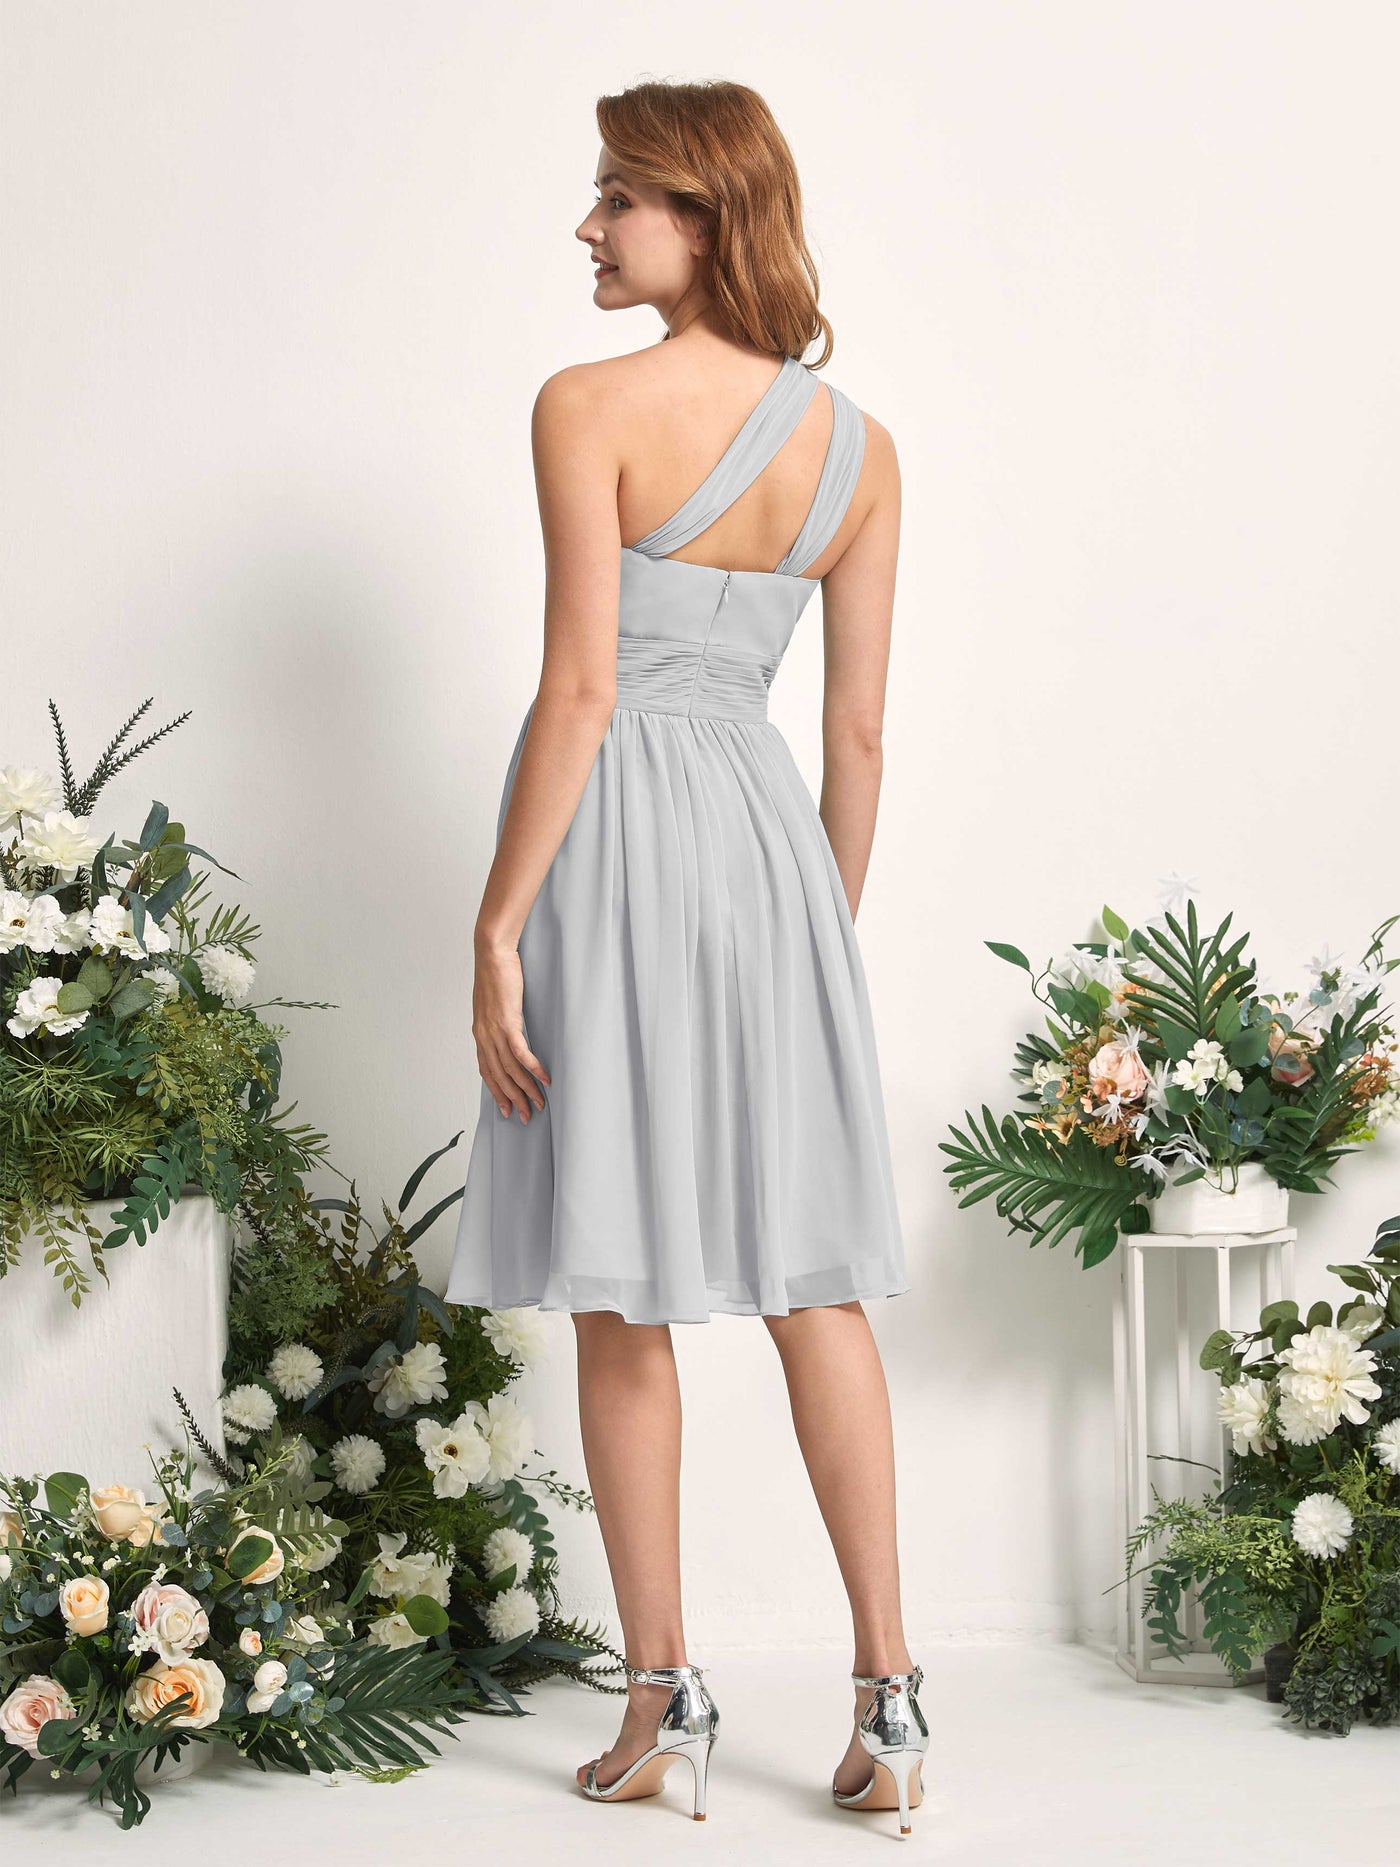 Bridesmaid Dress A-line Chiffon One Shoulder Knee Length Sleeveless Wedding Party Dress - Silver (81221227)#color_silver